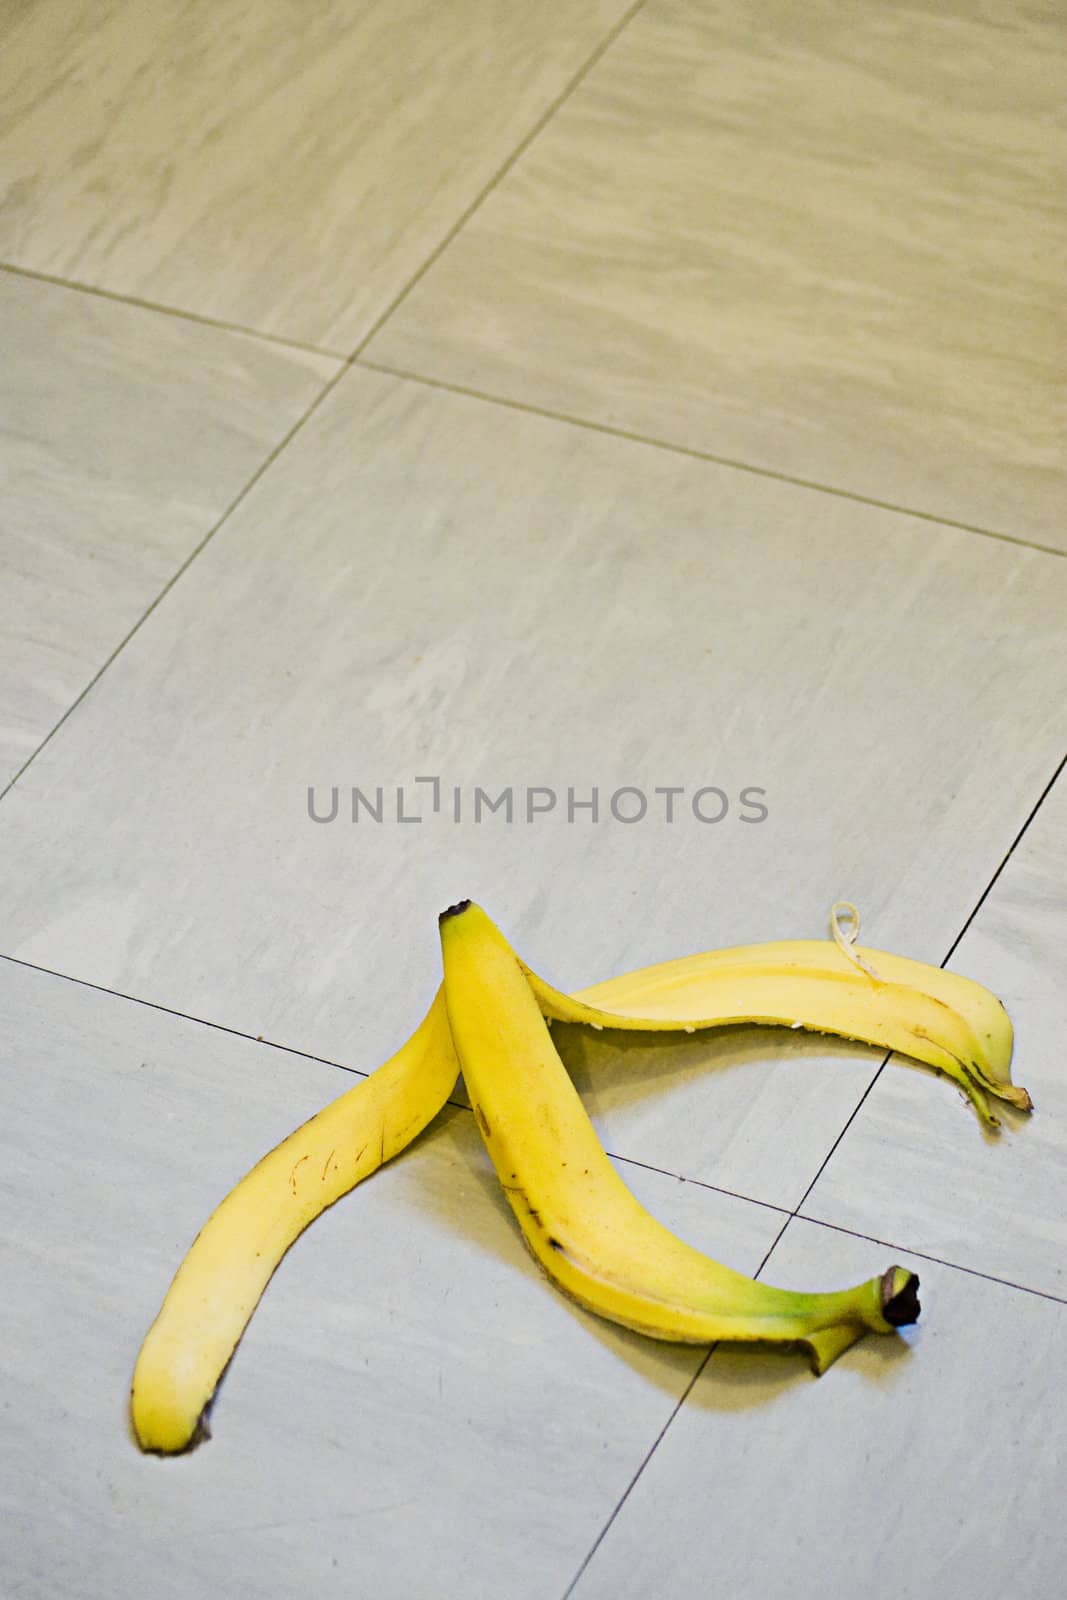 A banana skin lying on a tile floor ready for someone to slip